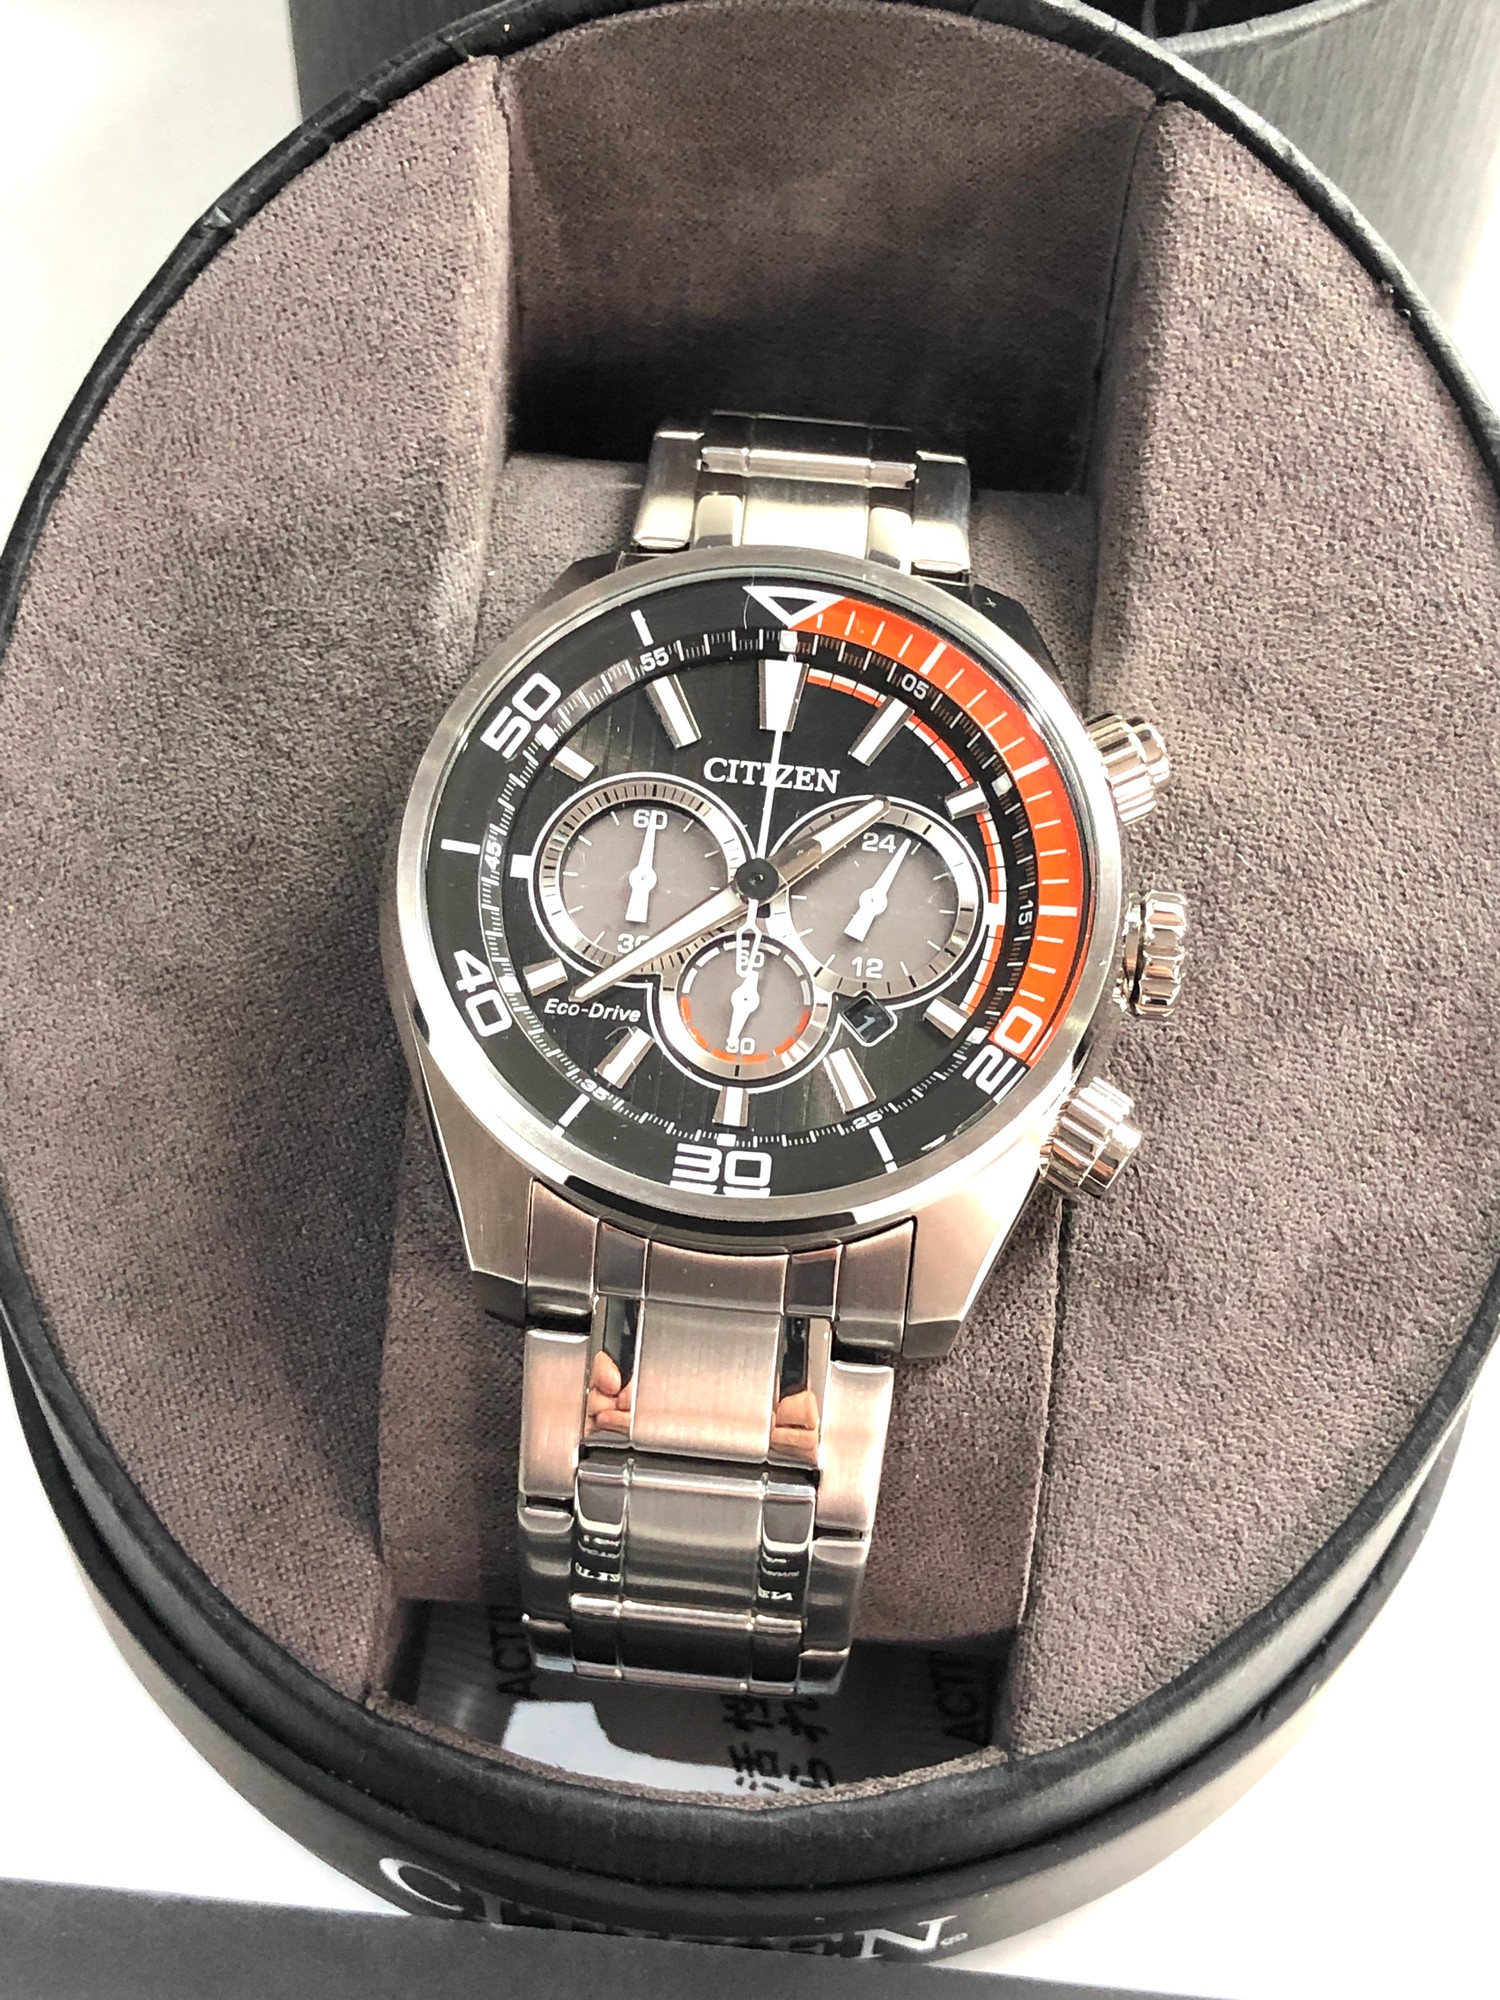 Citizen Eco-drive gents chronograph wristwatch in as new boxed condition working order but no - Image 2 of 7